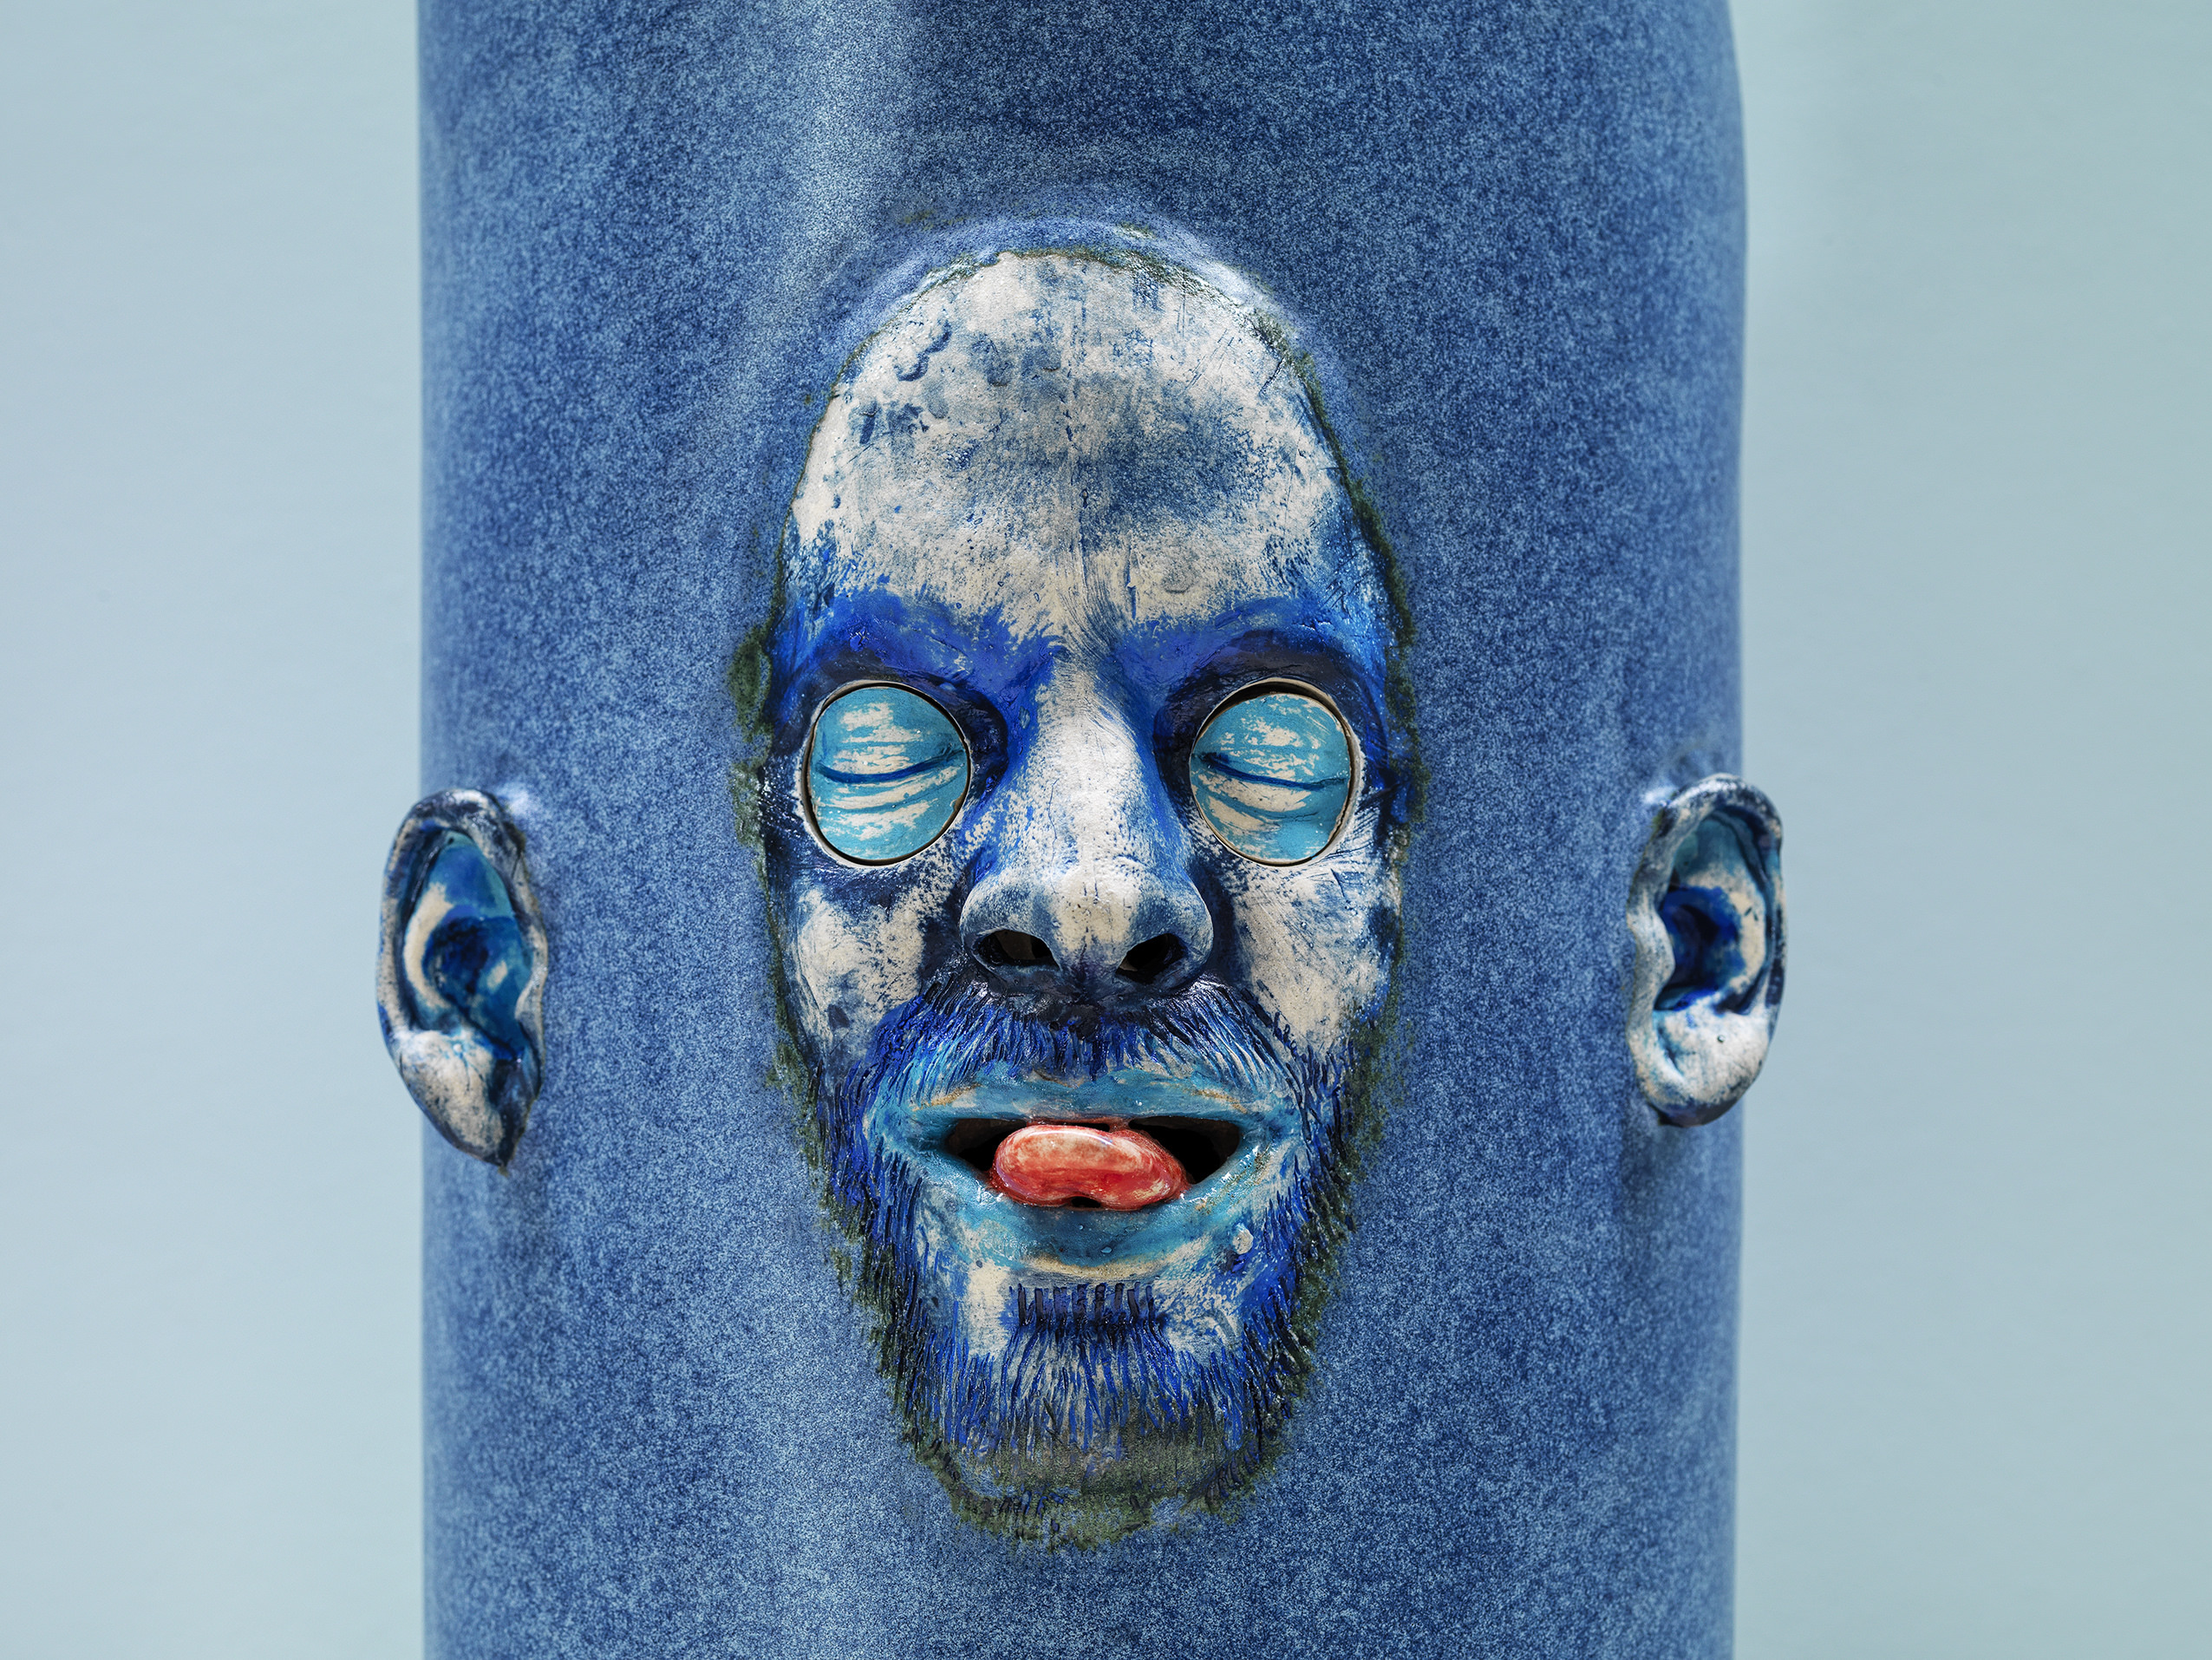 Close up of a blue sculpture of a face with their eyes closed and sticking out their tongue